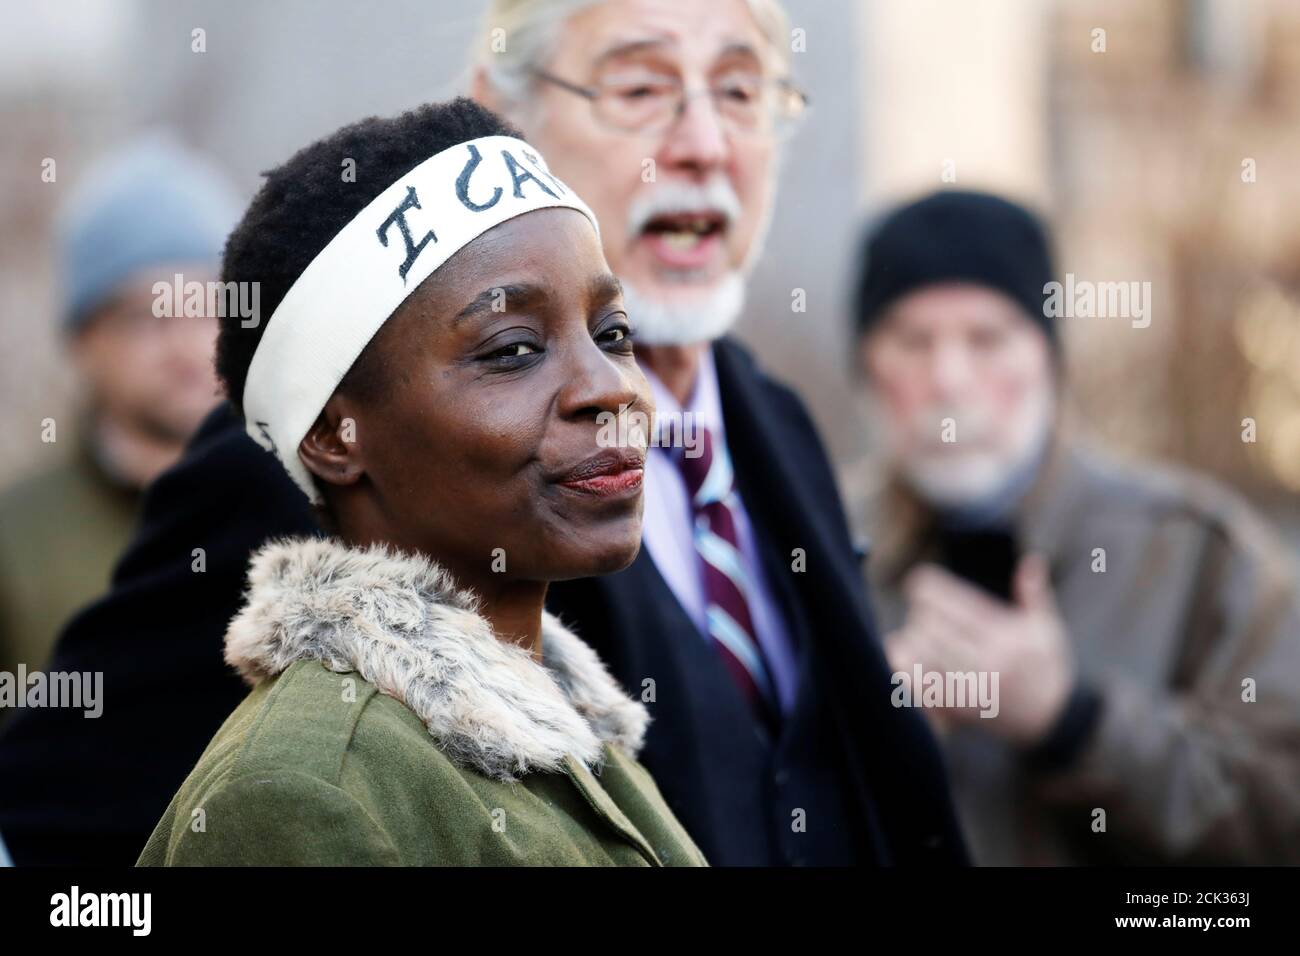 Therese Patricia Okoumou speaks to the media after her sentencing for conviction on attempted scaling of the Statue of Liberty to protest the U.S. immigration policy, outside a federal court in New York, U.S., March 19, 2019. REUTERS/Shannon Stapleton Stock Photo